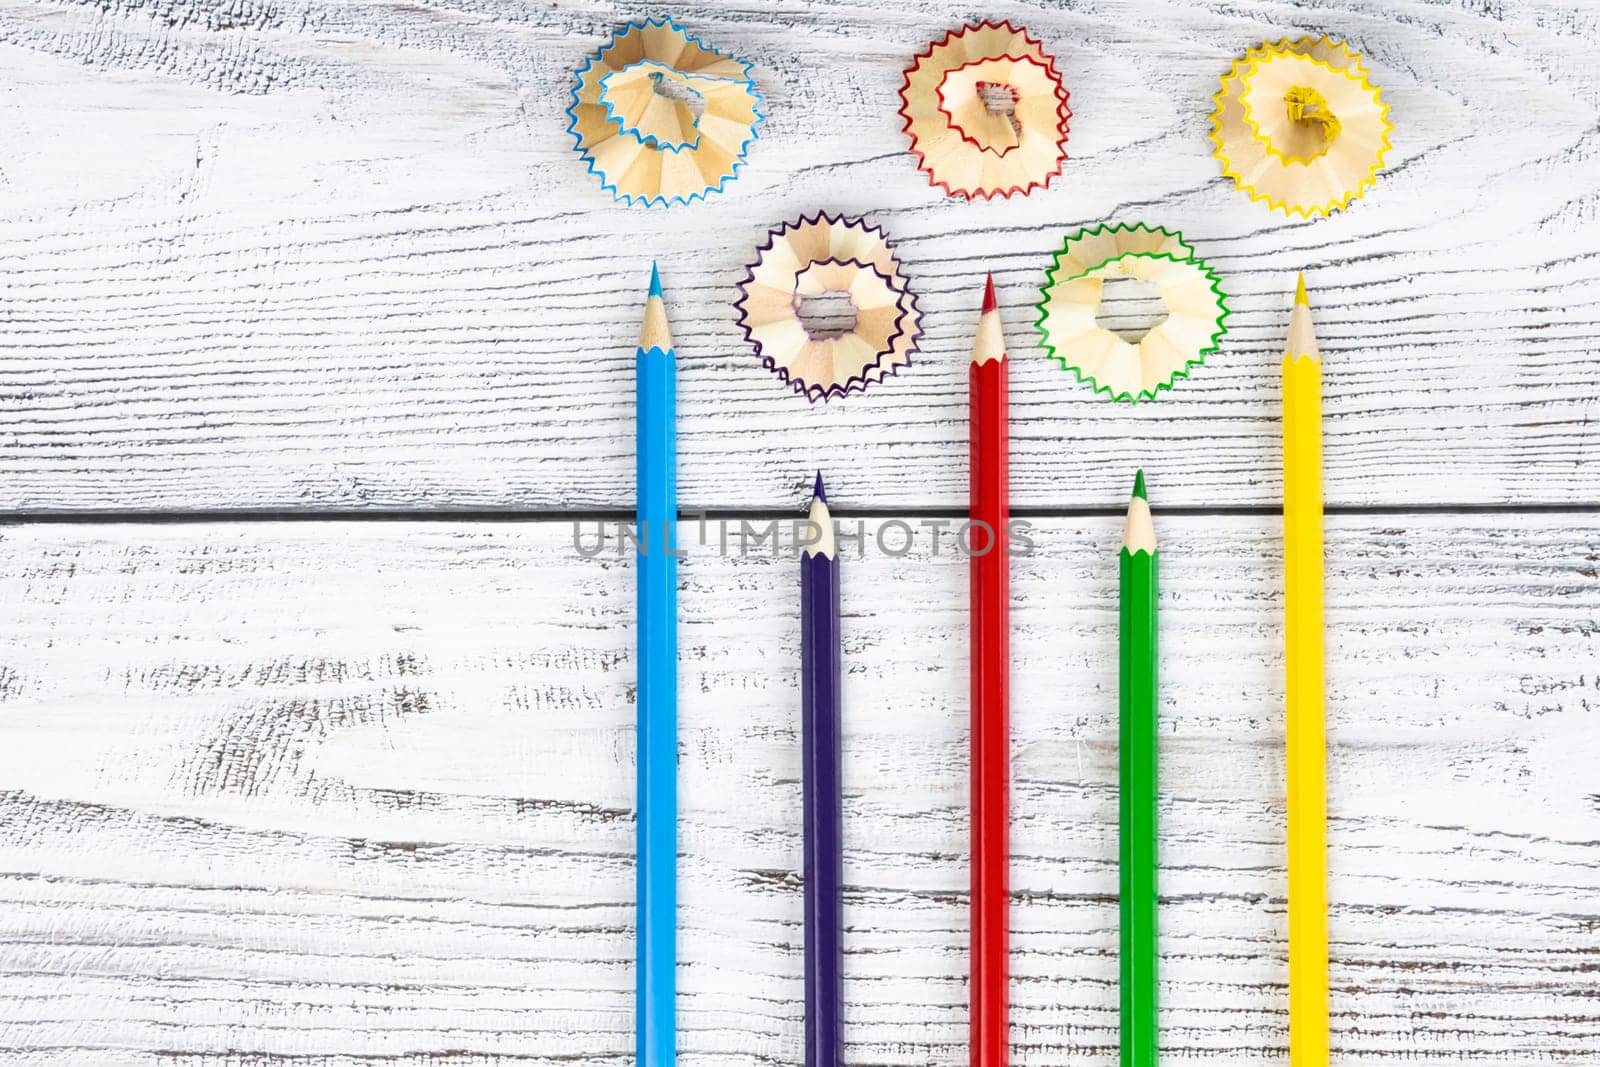 Five 5 colored, bright pencils for drawing drawings with wooden shavings are sharpened and lie on a wooden background, surface.